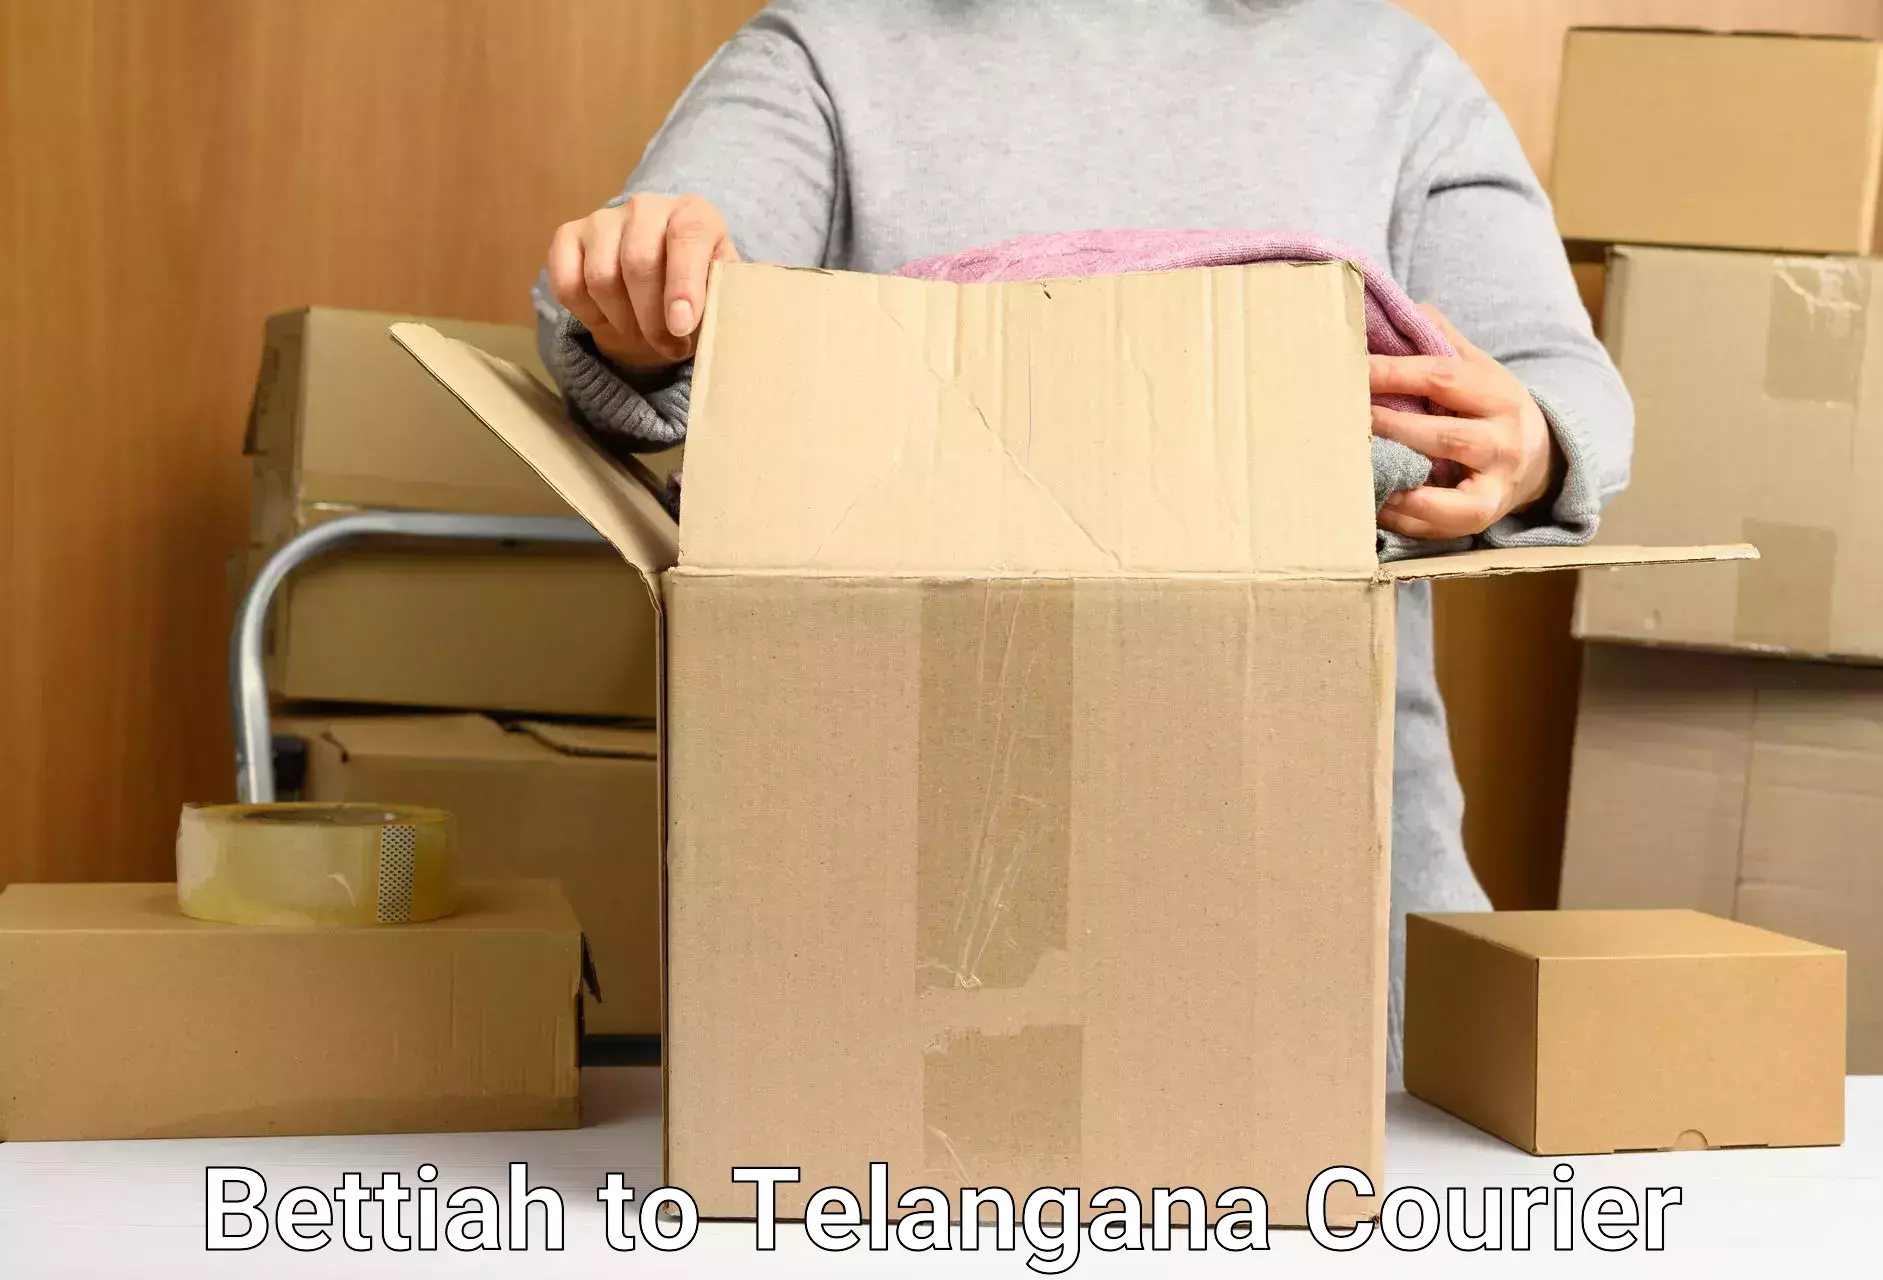 Parcel handling and care in Bettiah to Moinabad